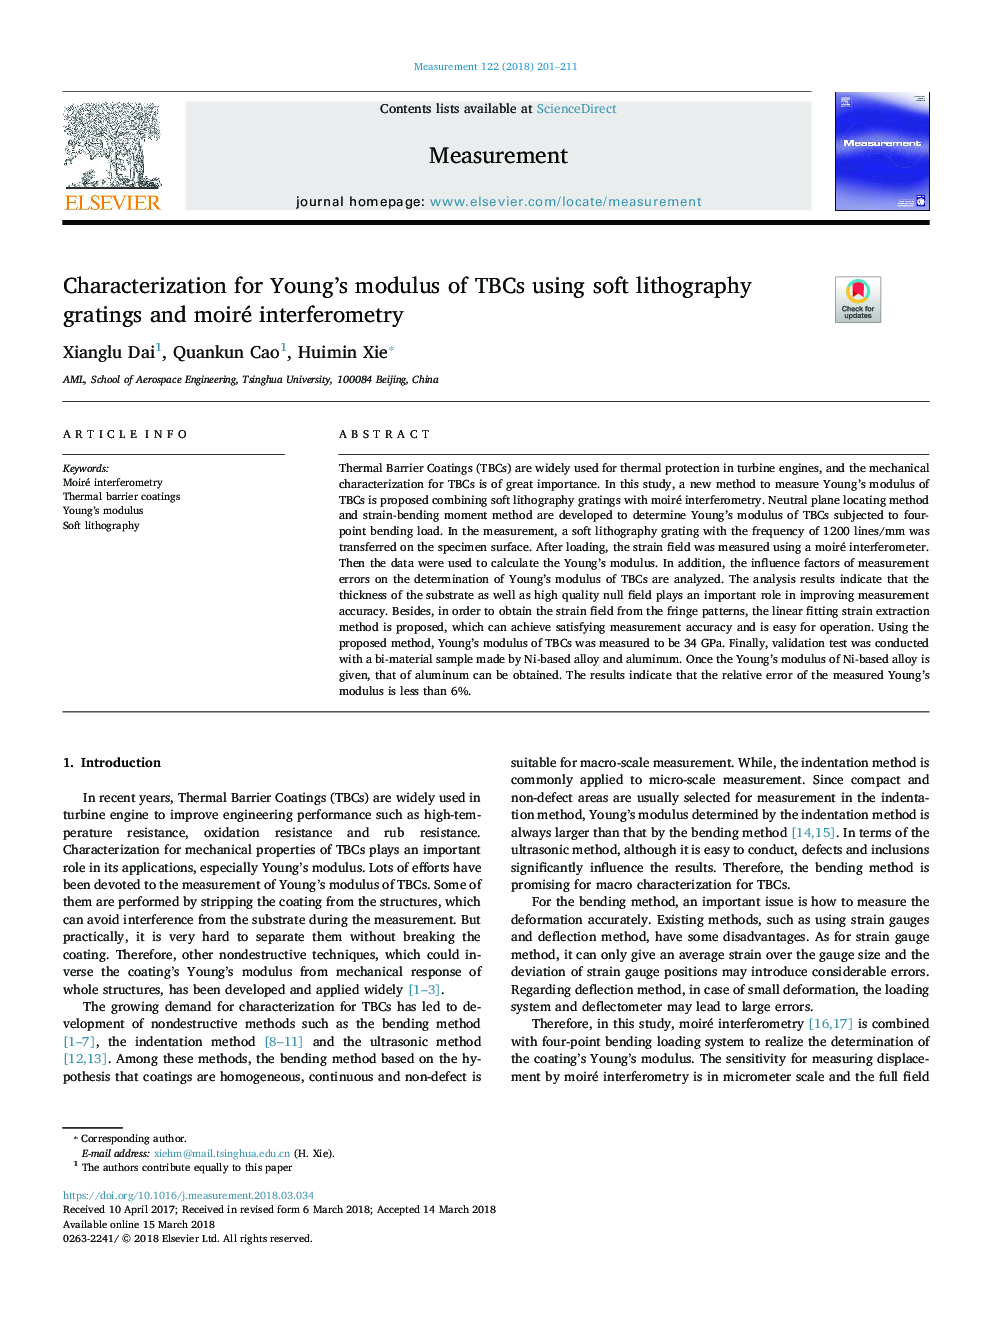 Characterization for Young's modulus of TBCs using soft lithography gratings and moiré interferometry